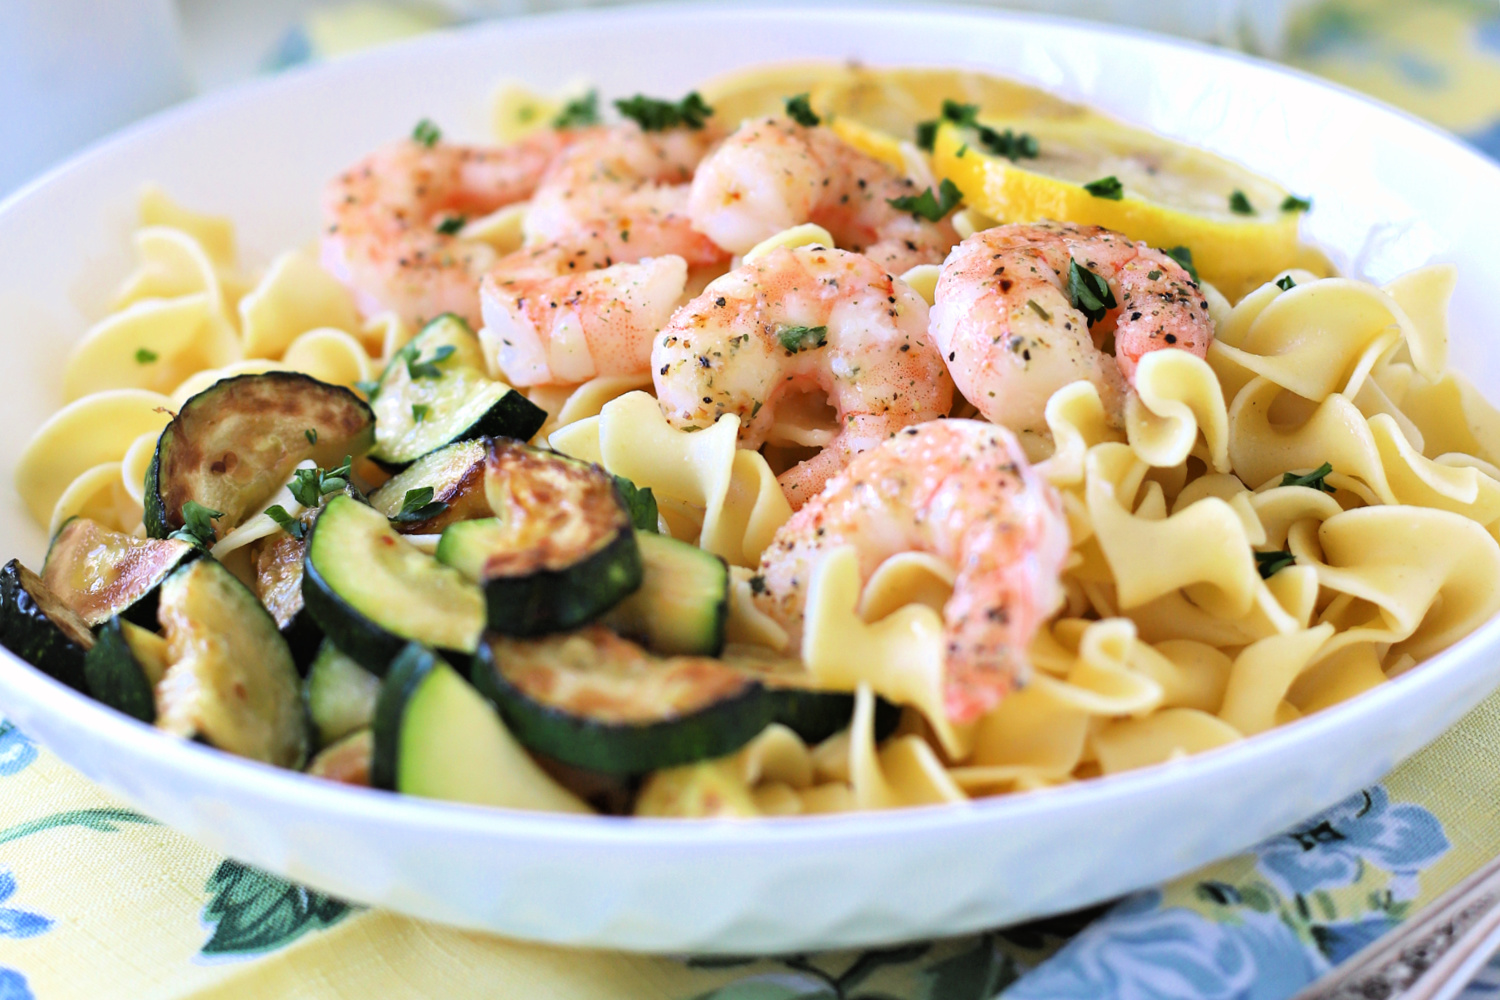 Serve this amazing one pan lemon shrimp over noodles or rice for a meal sure to impress. It couldn't be tastier or easier to make. A quick and easy recipe using butter and Italian Seasoning Mix and baked in the oven.